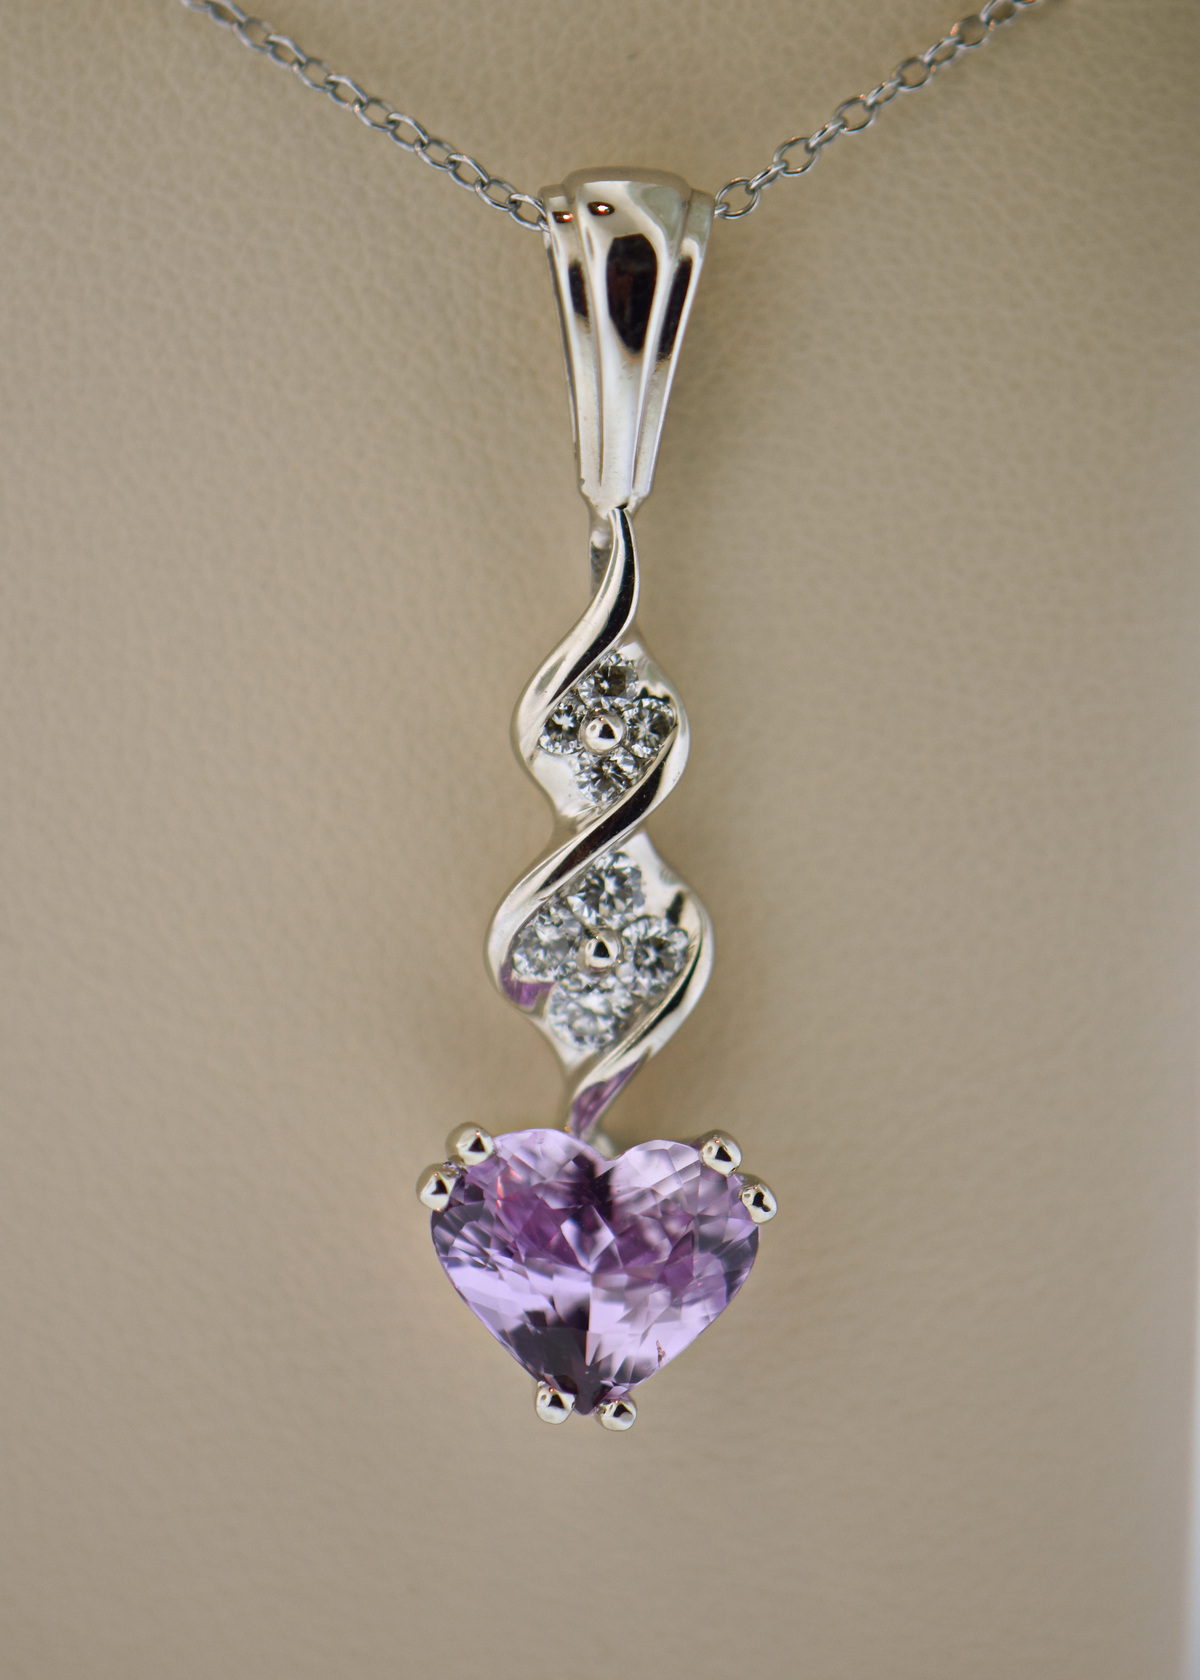 Sterling Silver & Pink Sapphire Heart Pendant Necklace